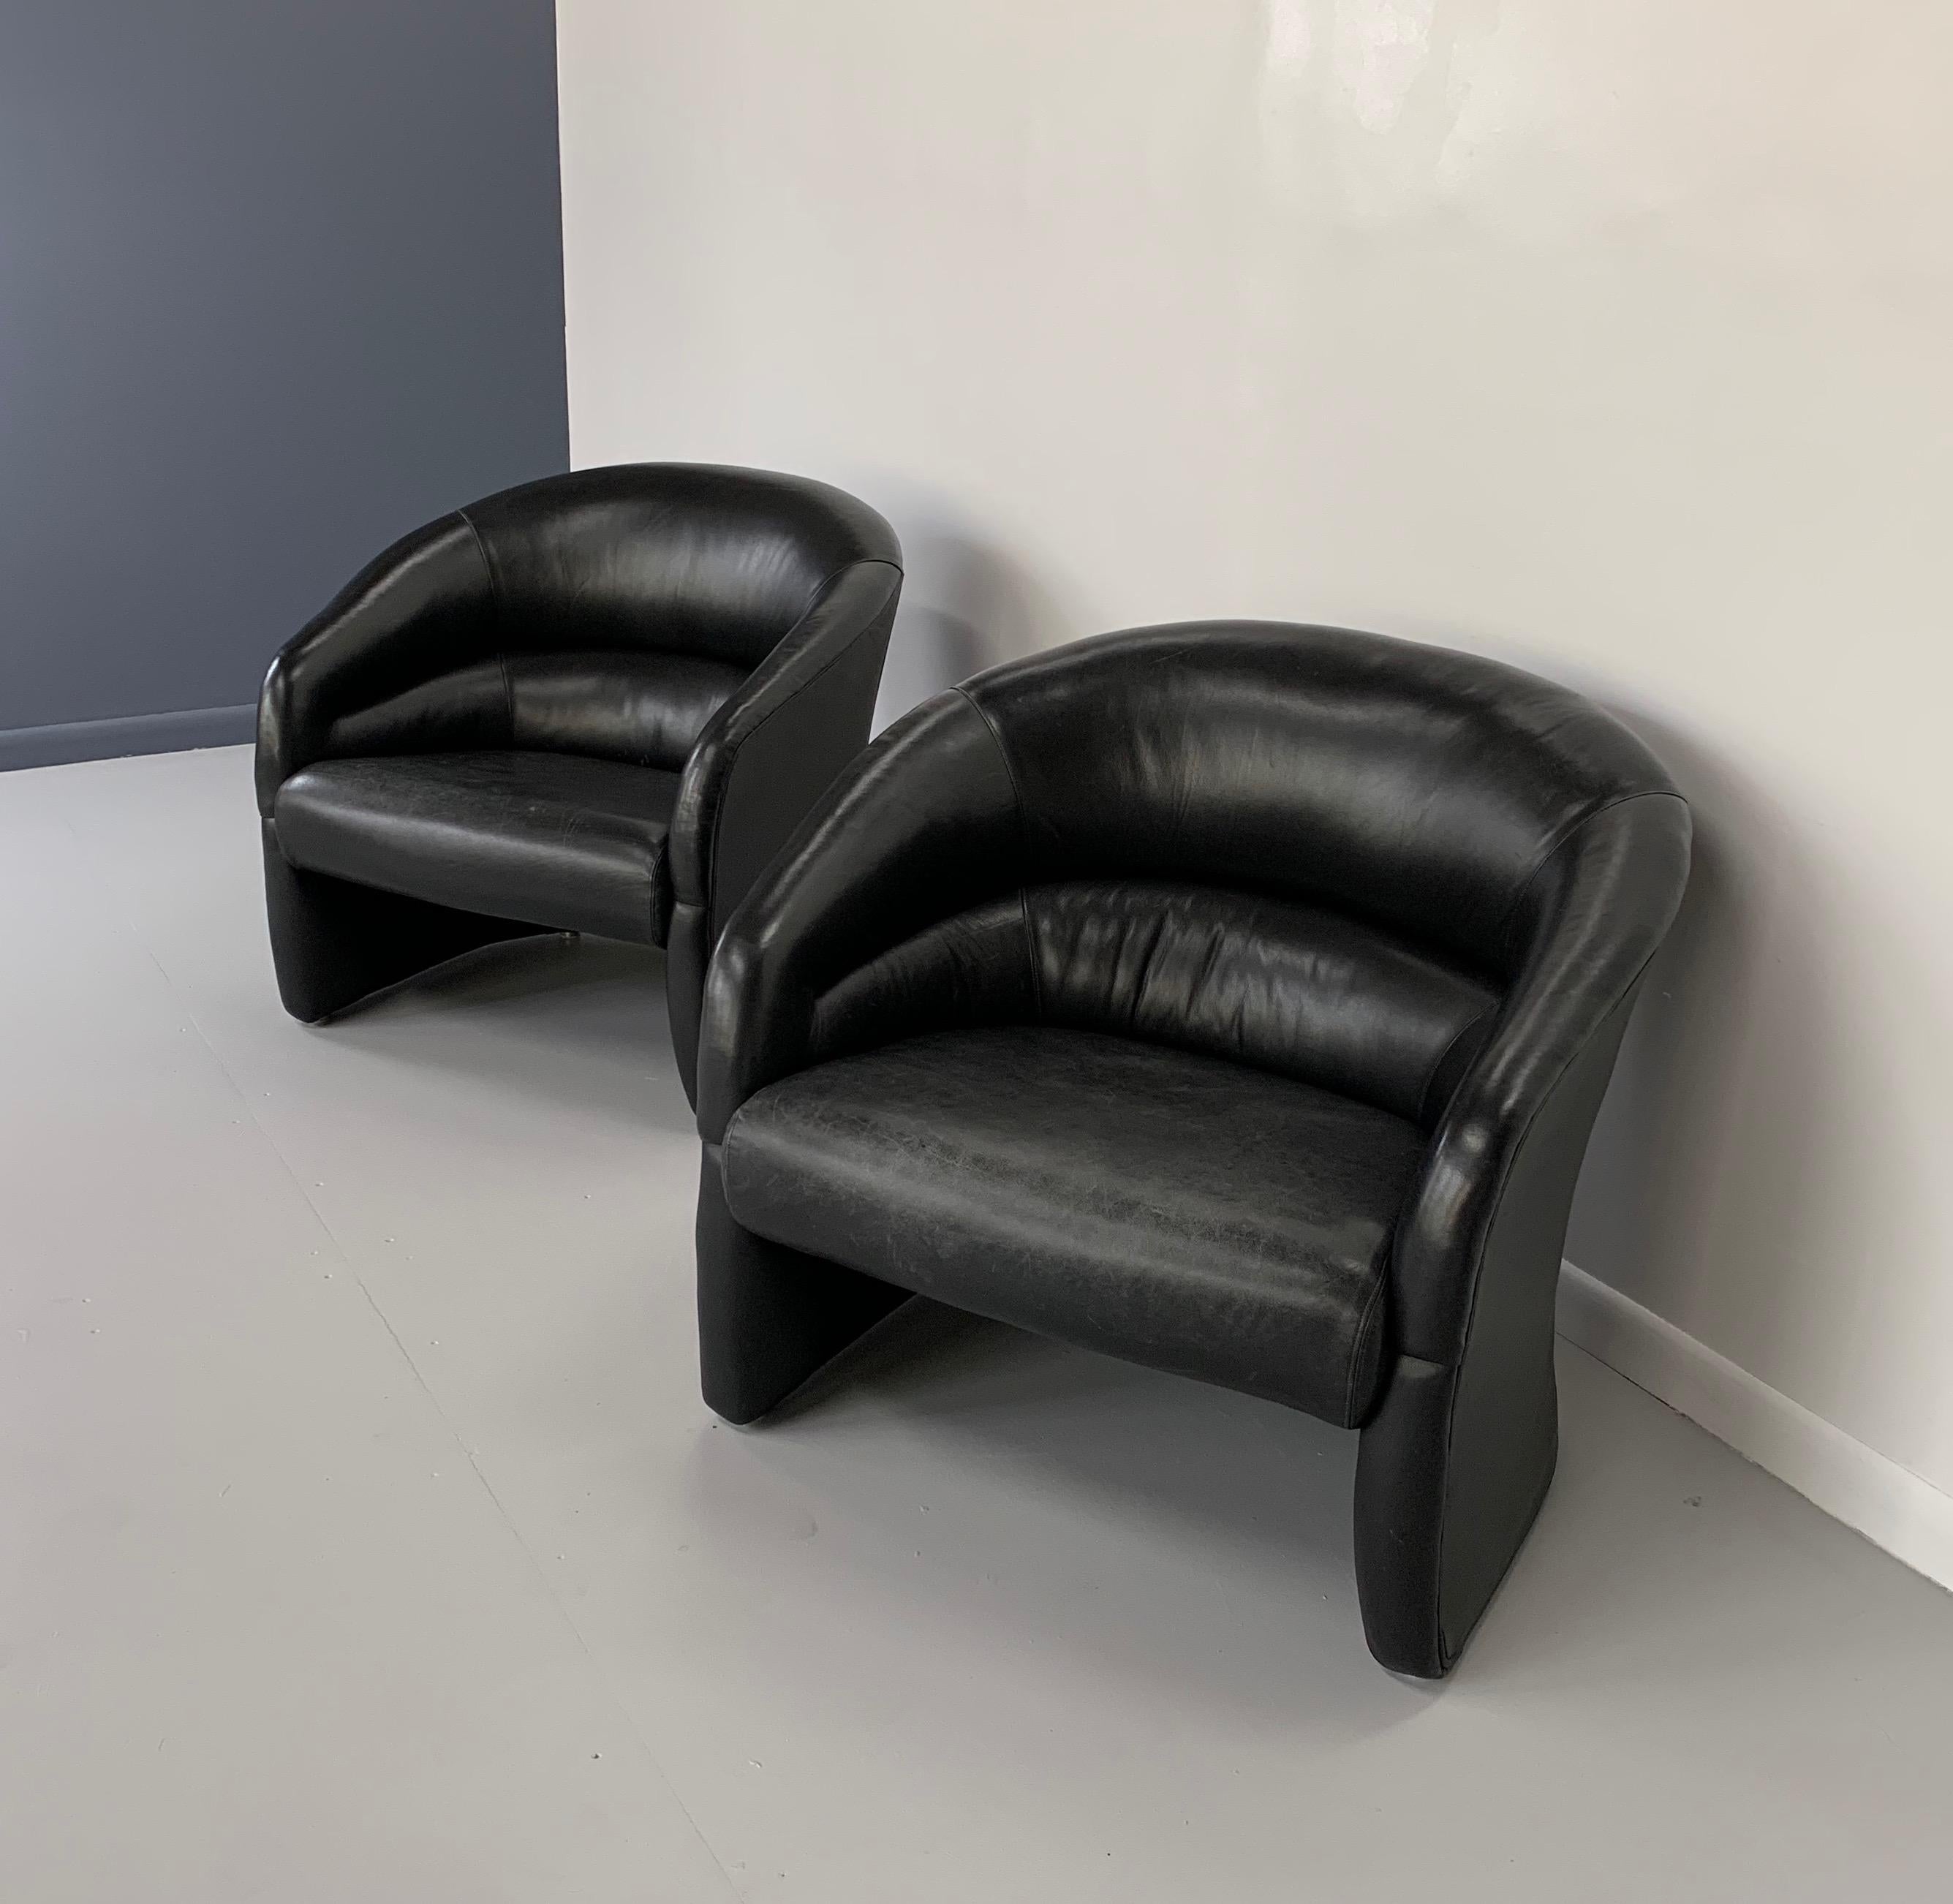 Two pair of black leather barrel back club chairs. These chairs are upholstered in a supple black leather with a pleated back and are very comfortably cushioned.